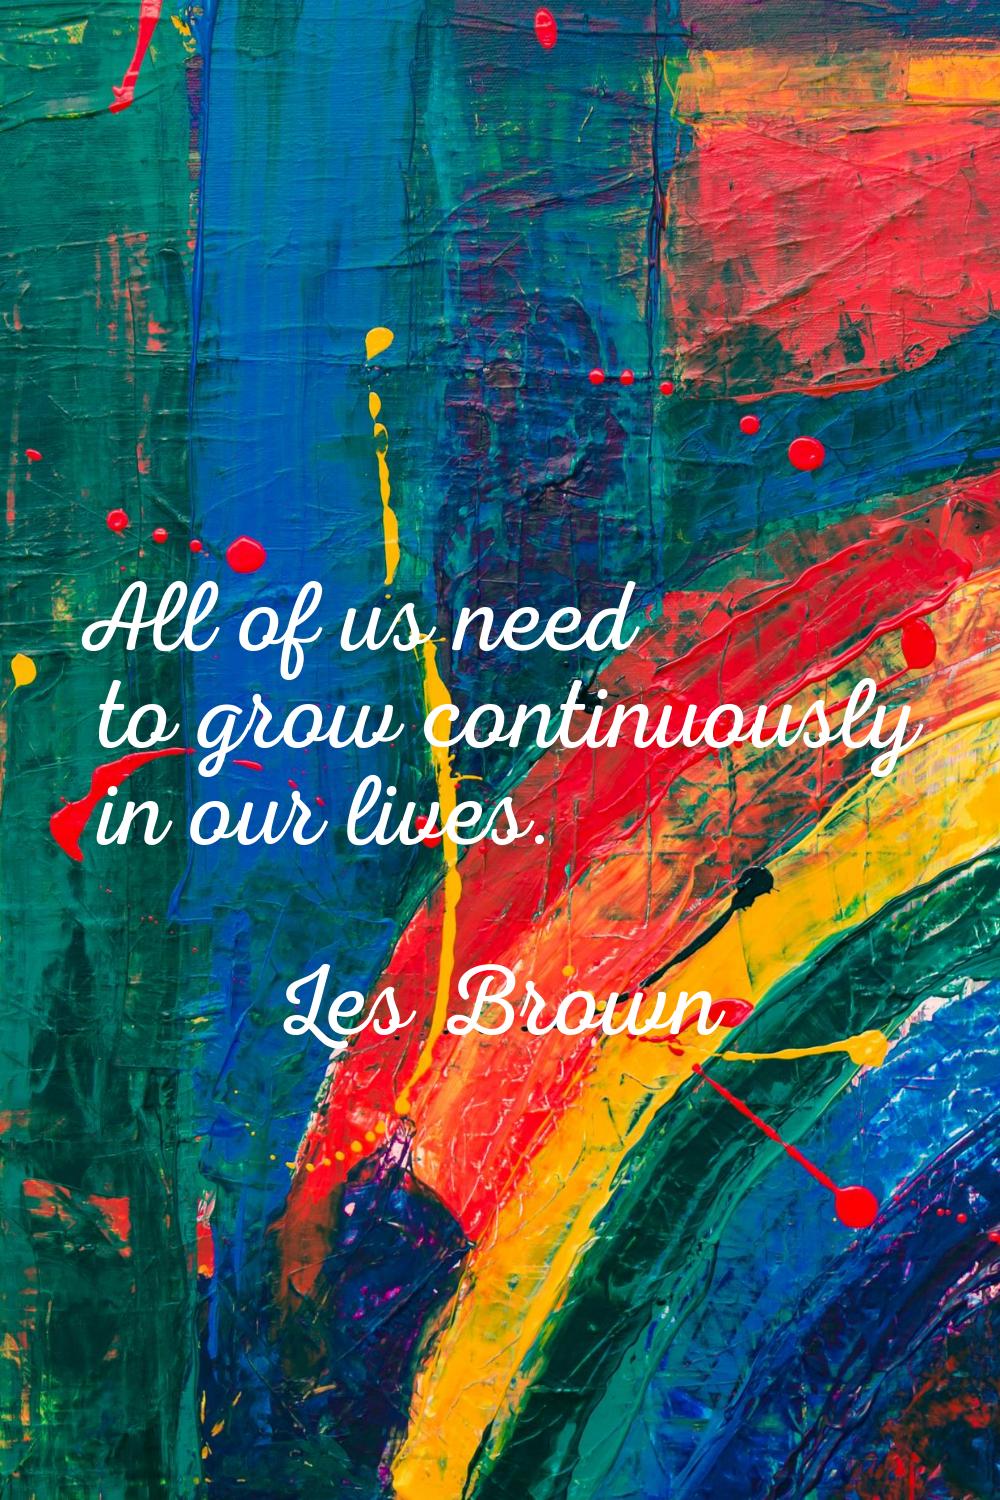 All of us need to grow continuously in our lives.